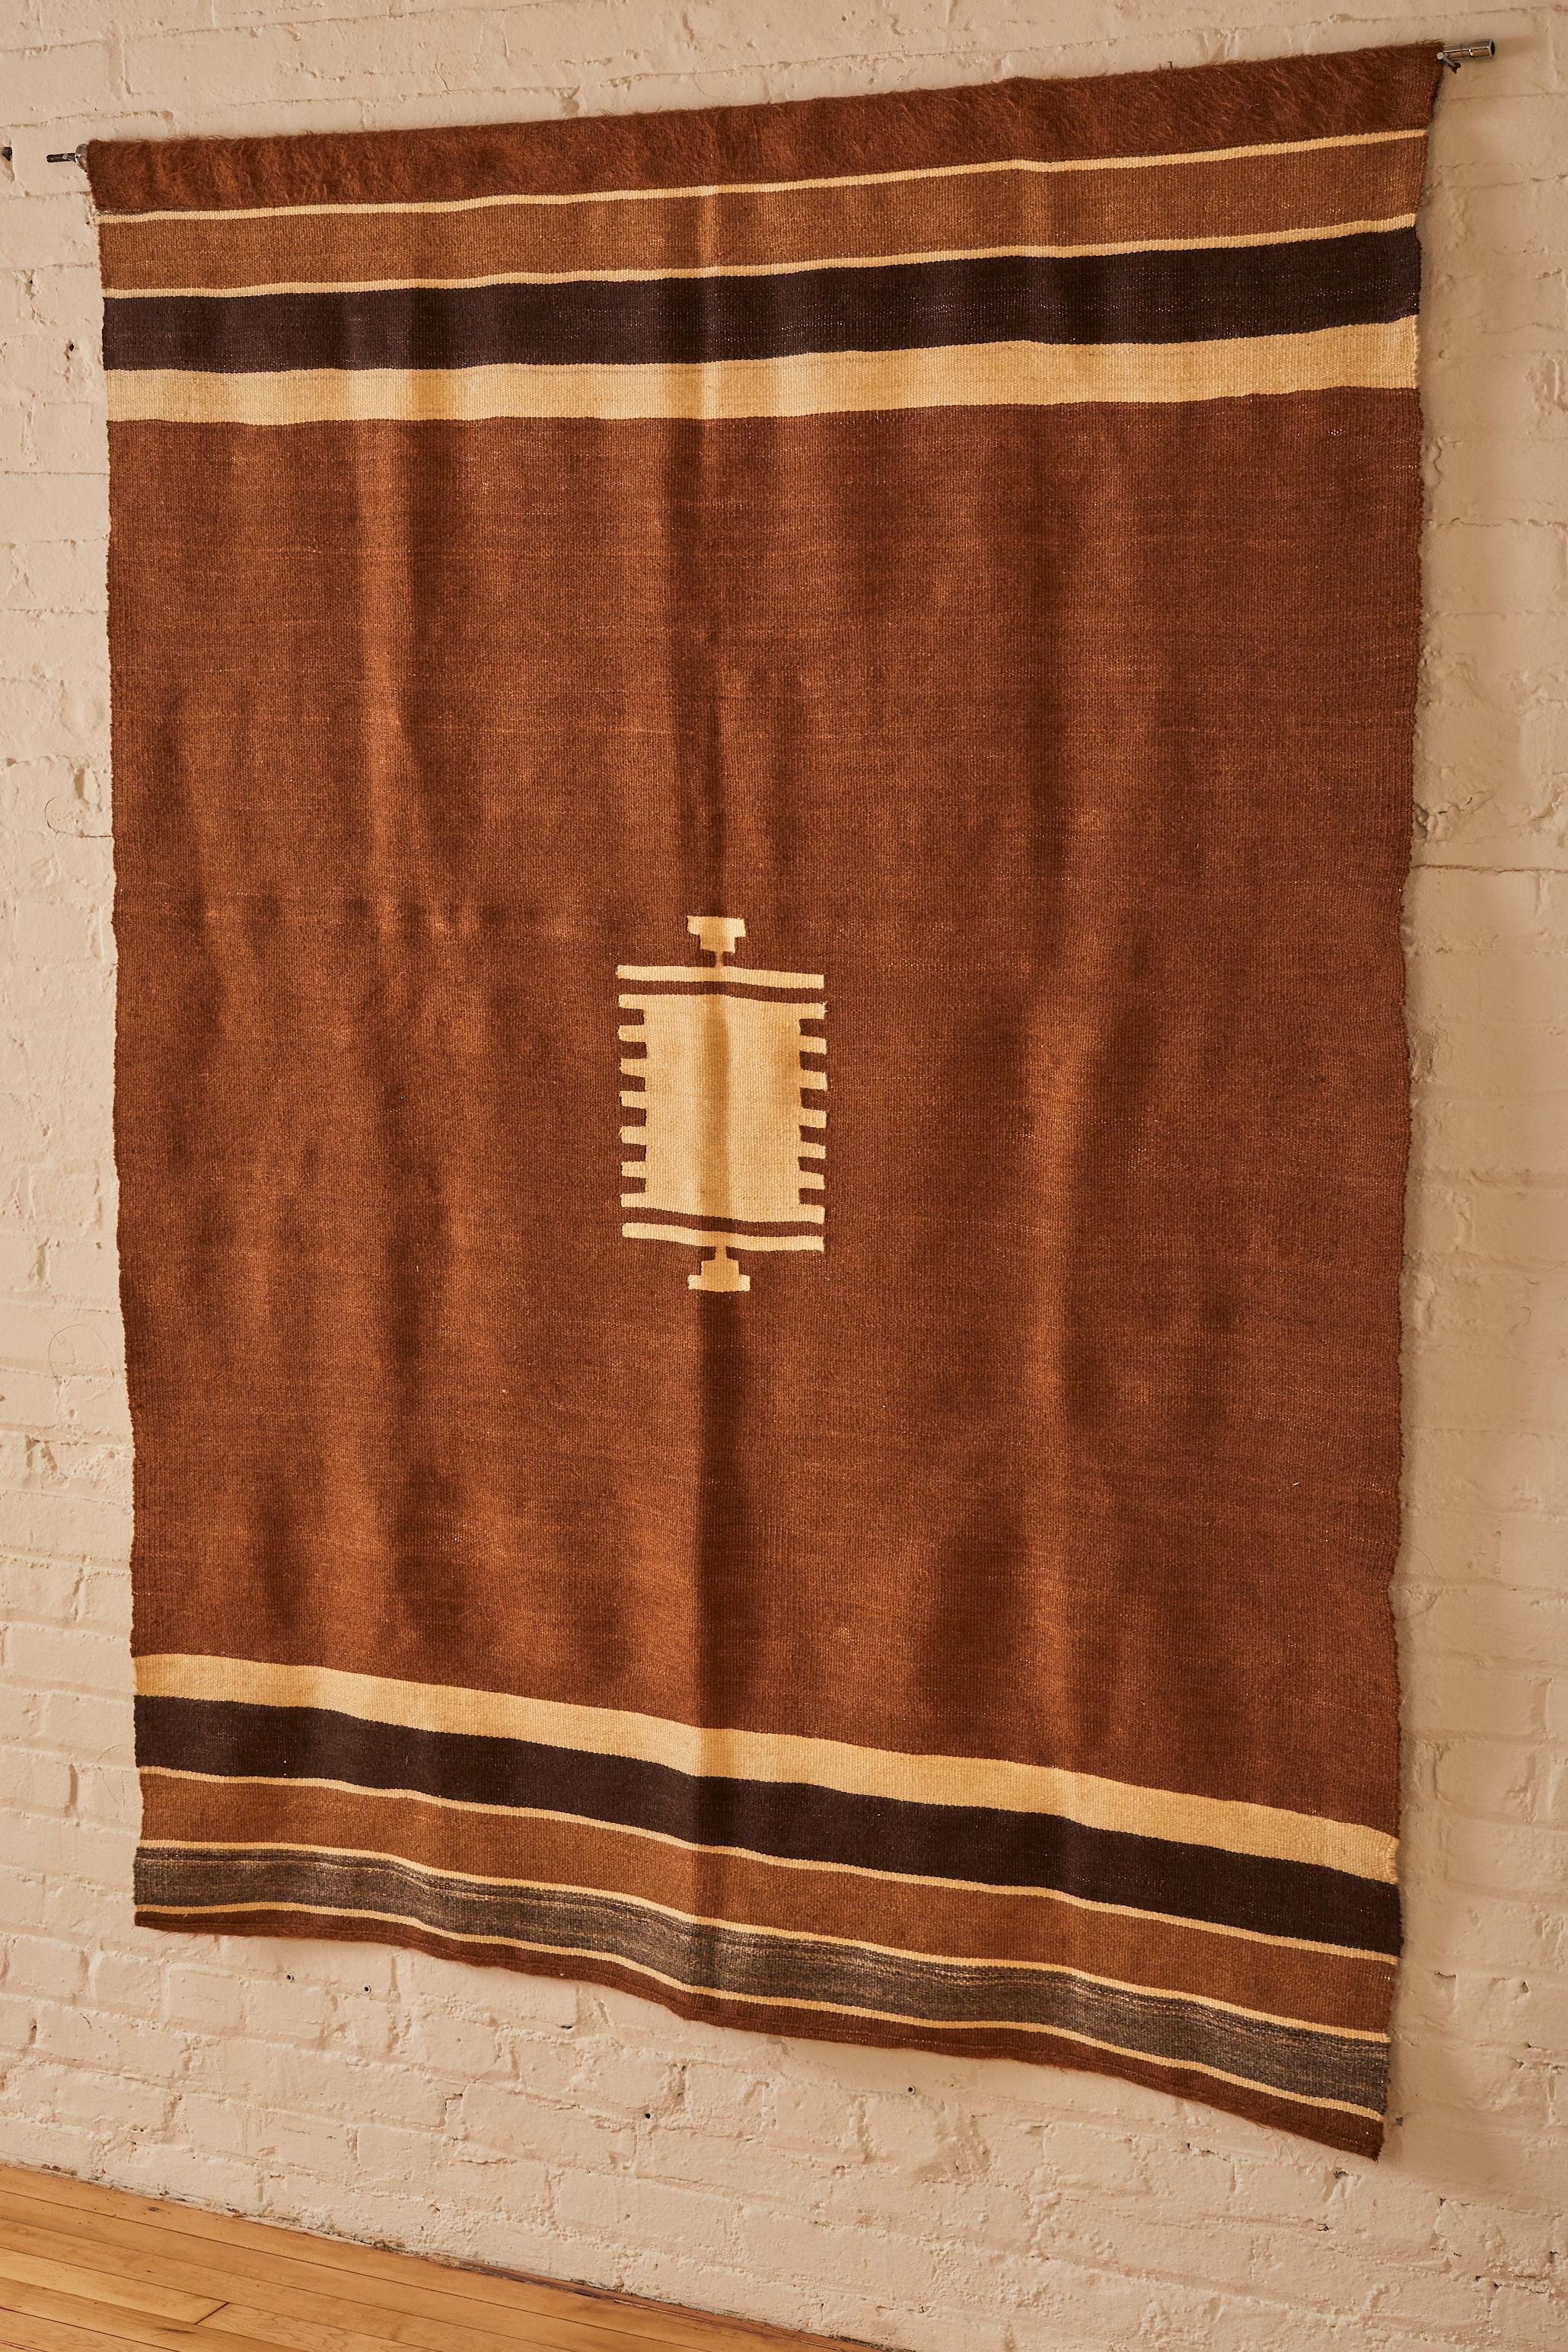 Tribal Moroccan Tapestry in mohair.

